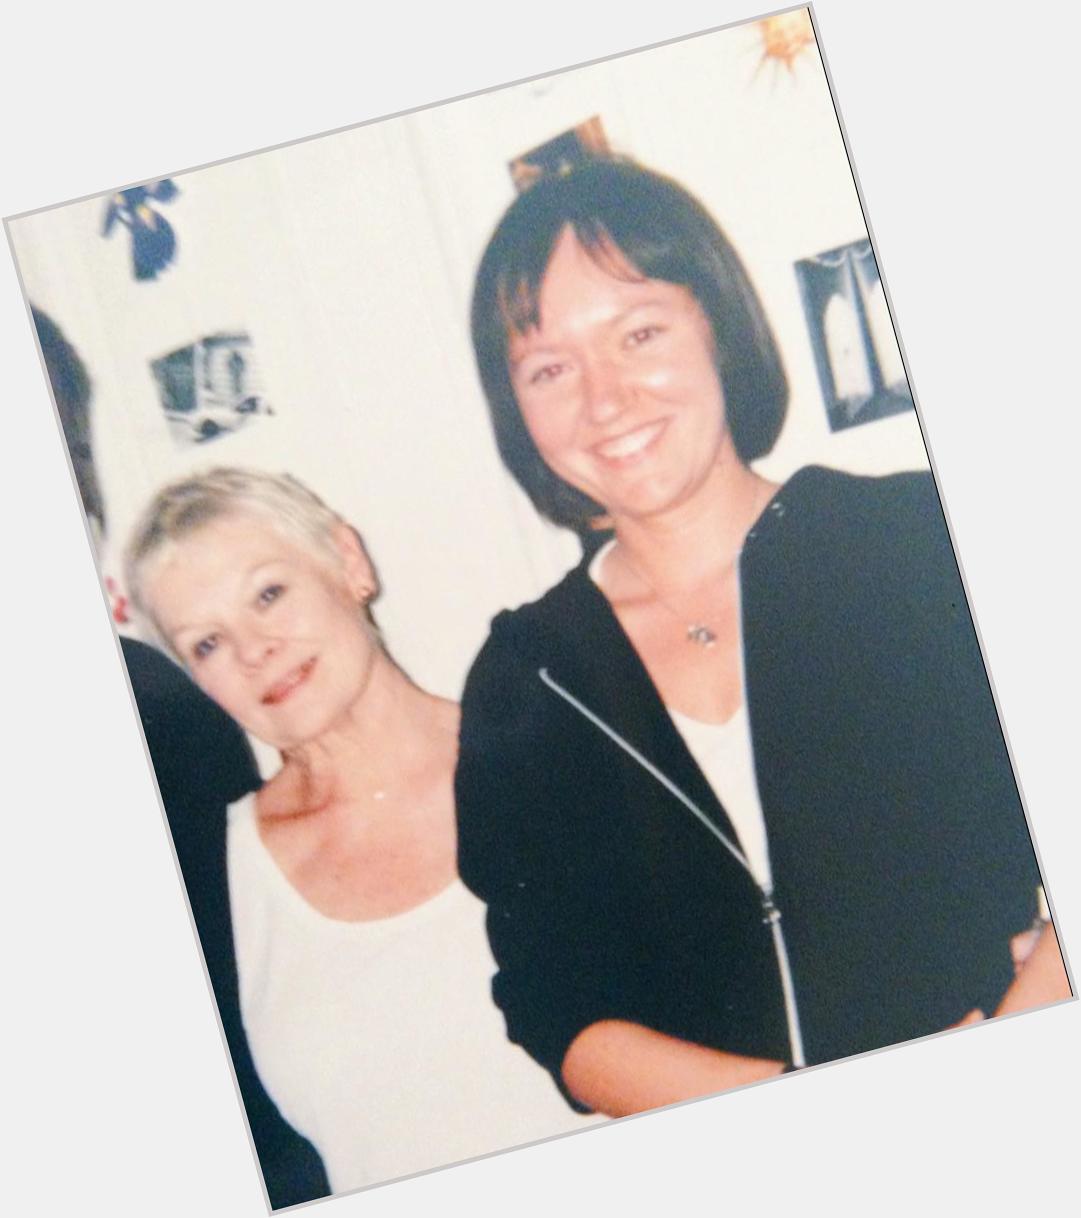 Happy 80th birthday Dame Judi Dench! I met her years ago after seeing Amys View on Broadway. She was so gracious. 